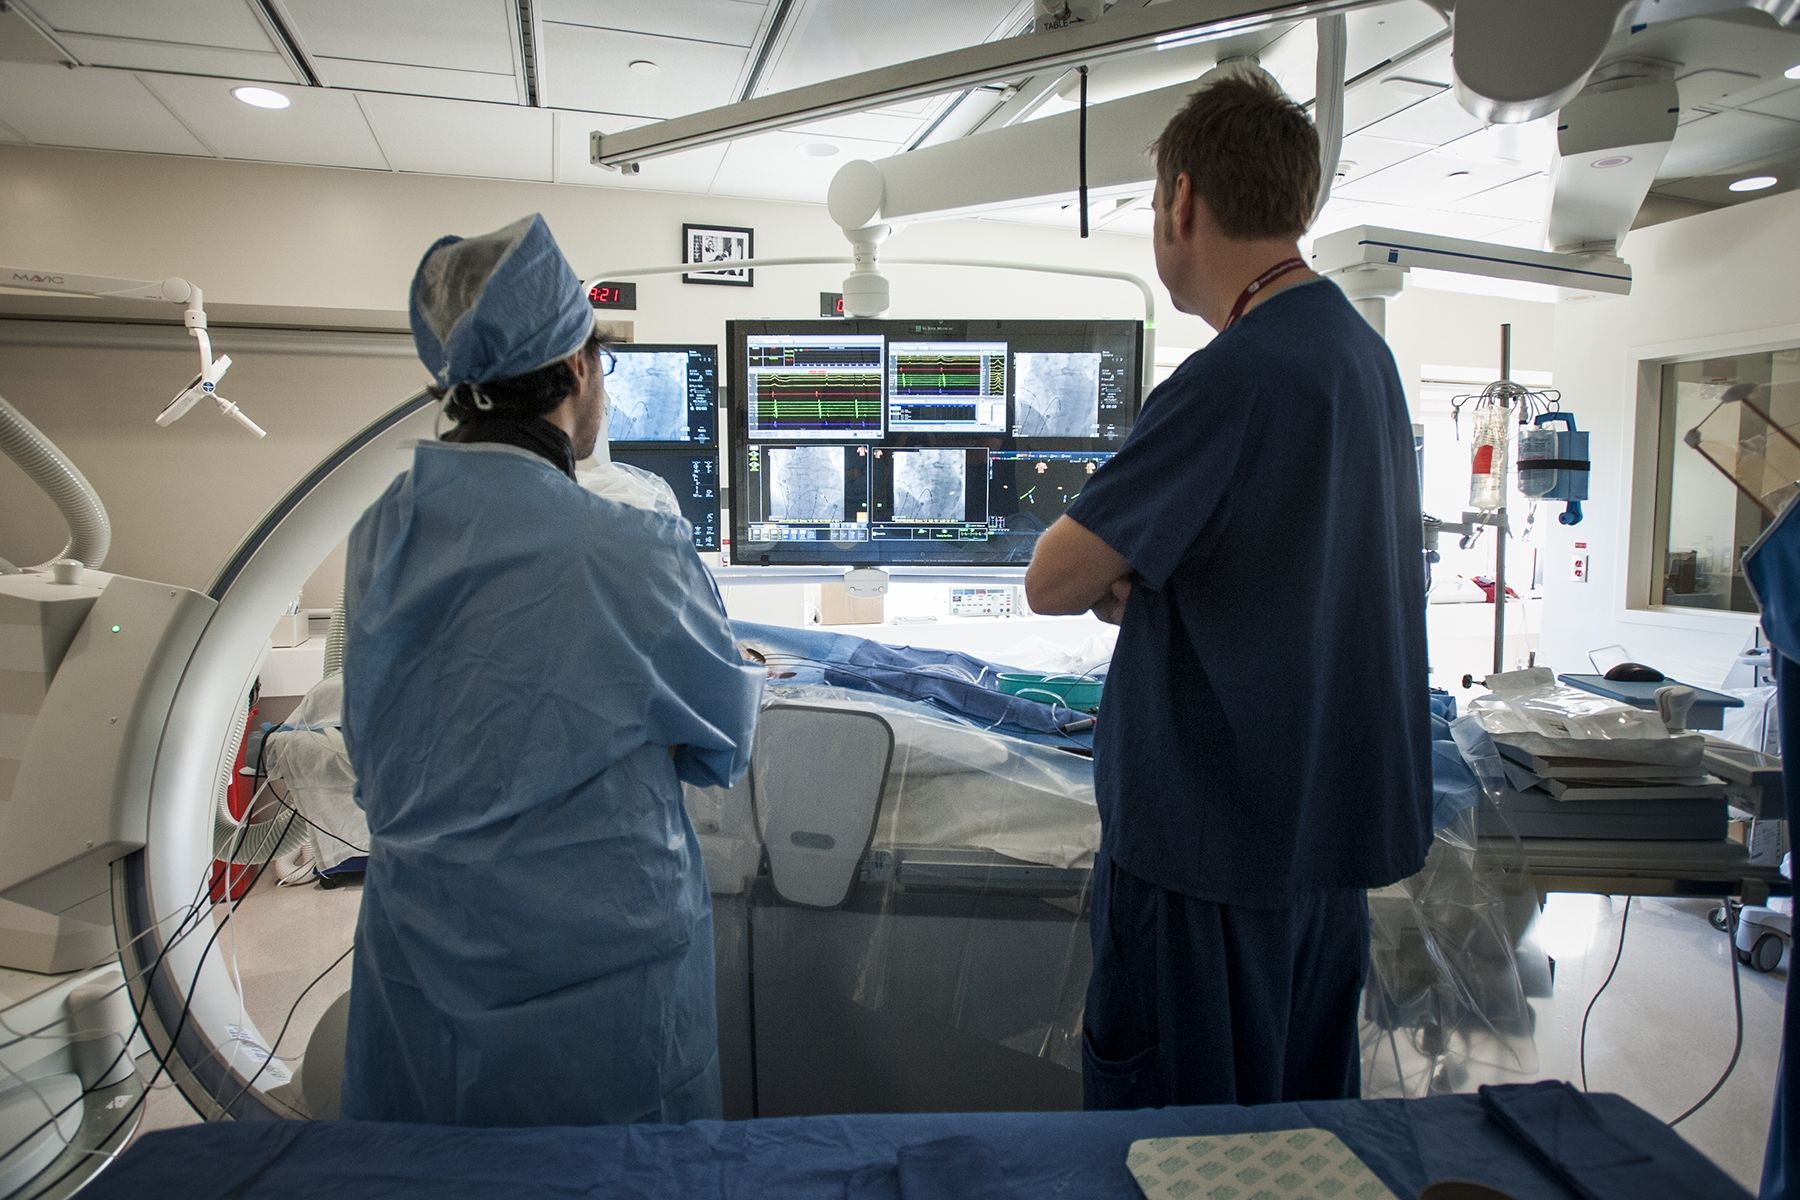 Kingston General Hospital new electrophysiology (EP) lab, the first in Ontario to use a GPS-like technology during cardiac procedures called MediGuide.